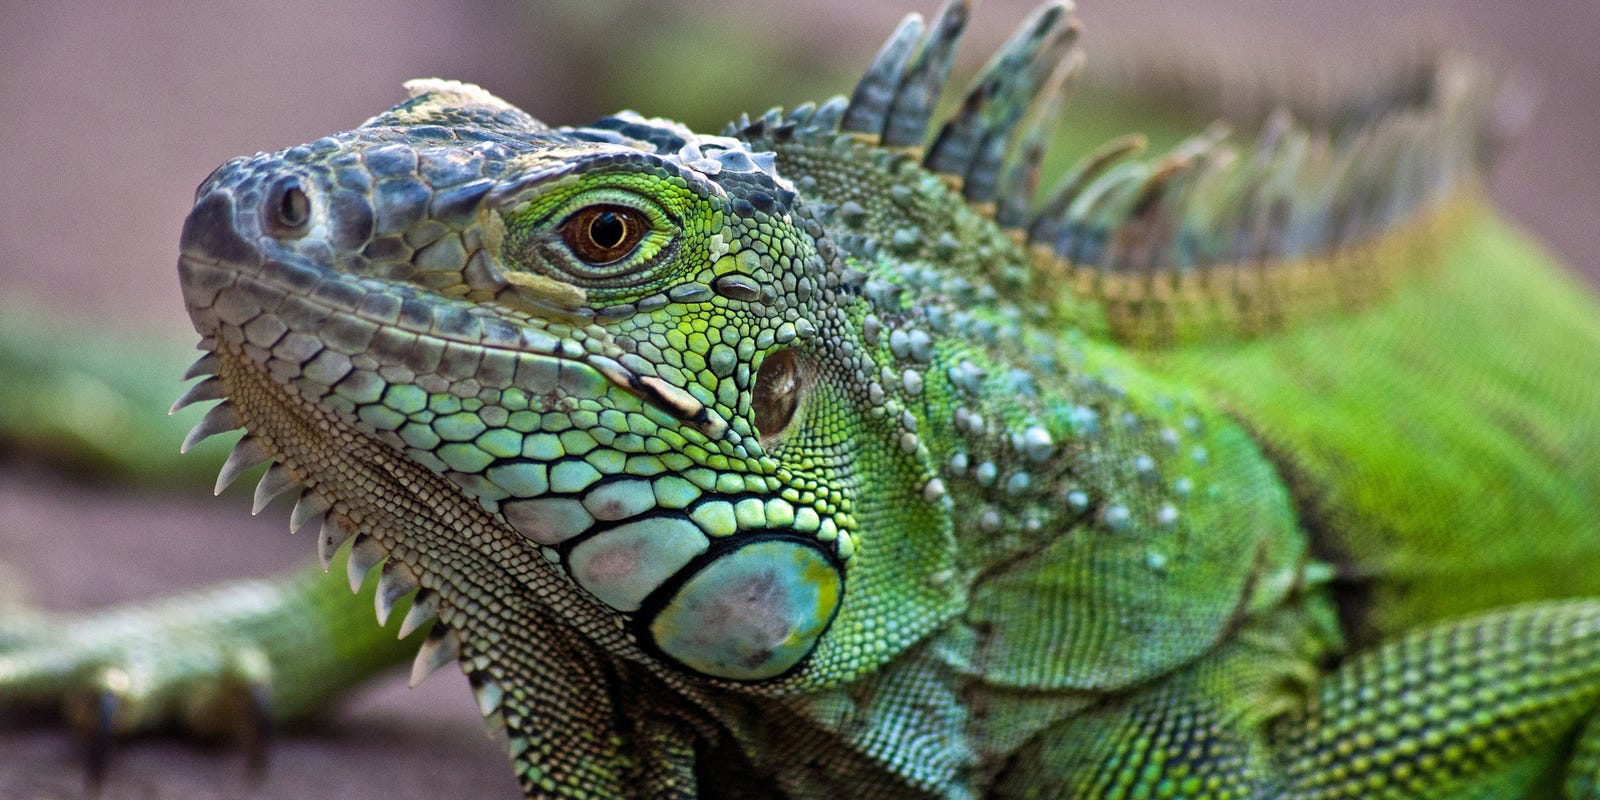 'Falling iguana' alert issued in Florida due to cold weather1600 x 800